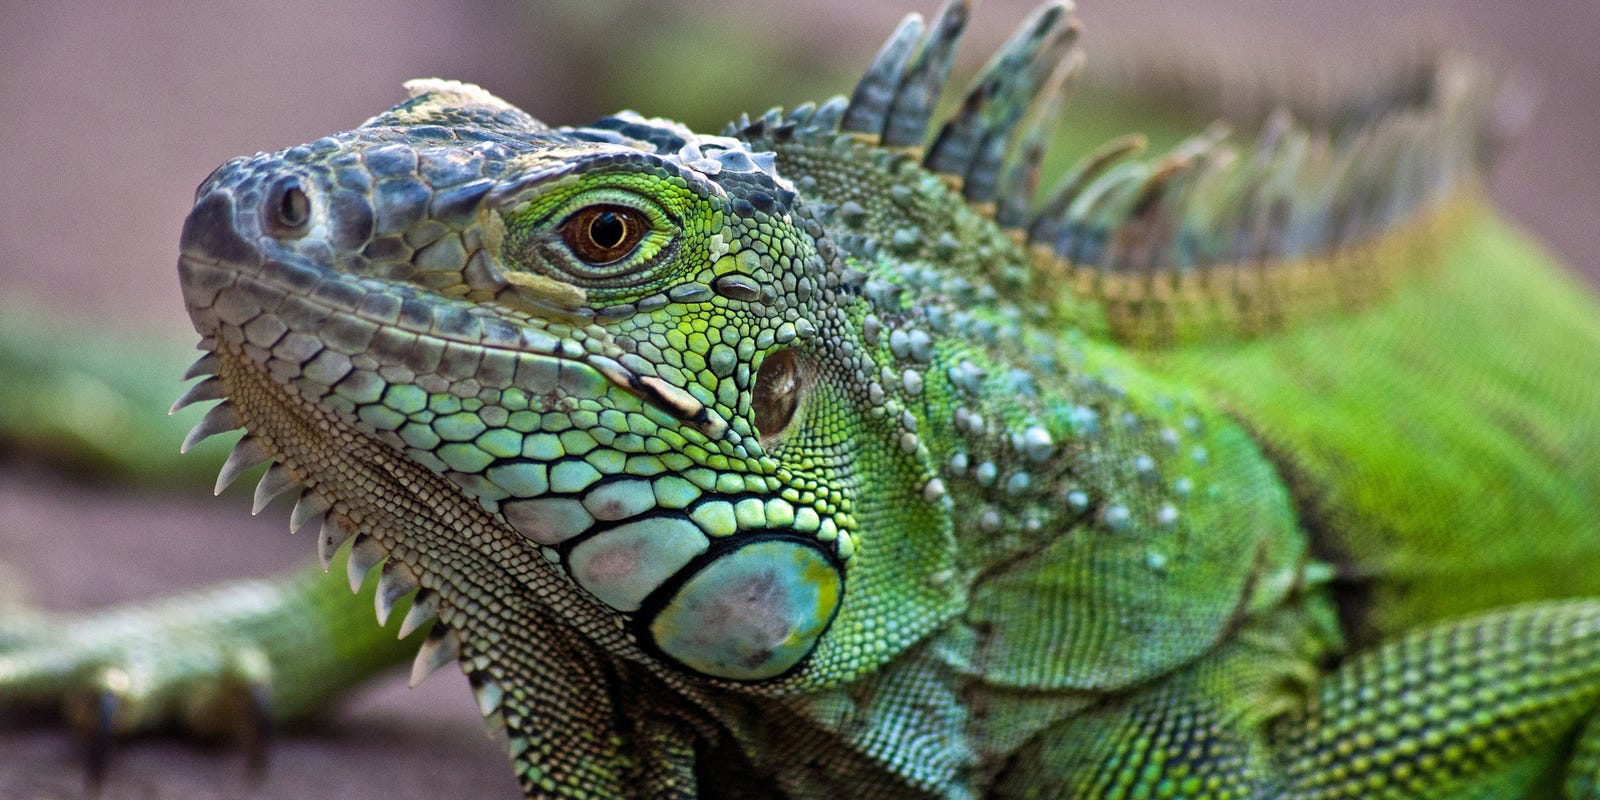 'Falling iguana' alert issued in Florida due to cold weather1600 x 800